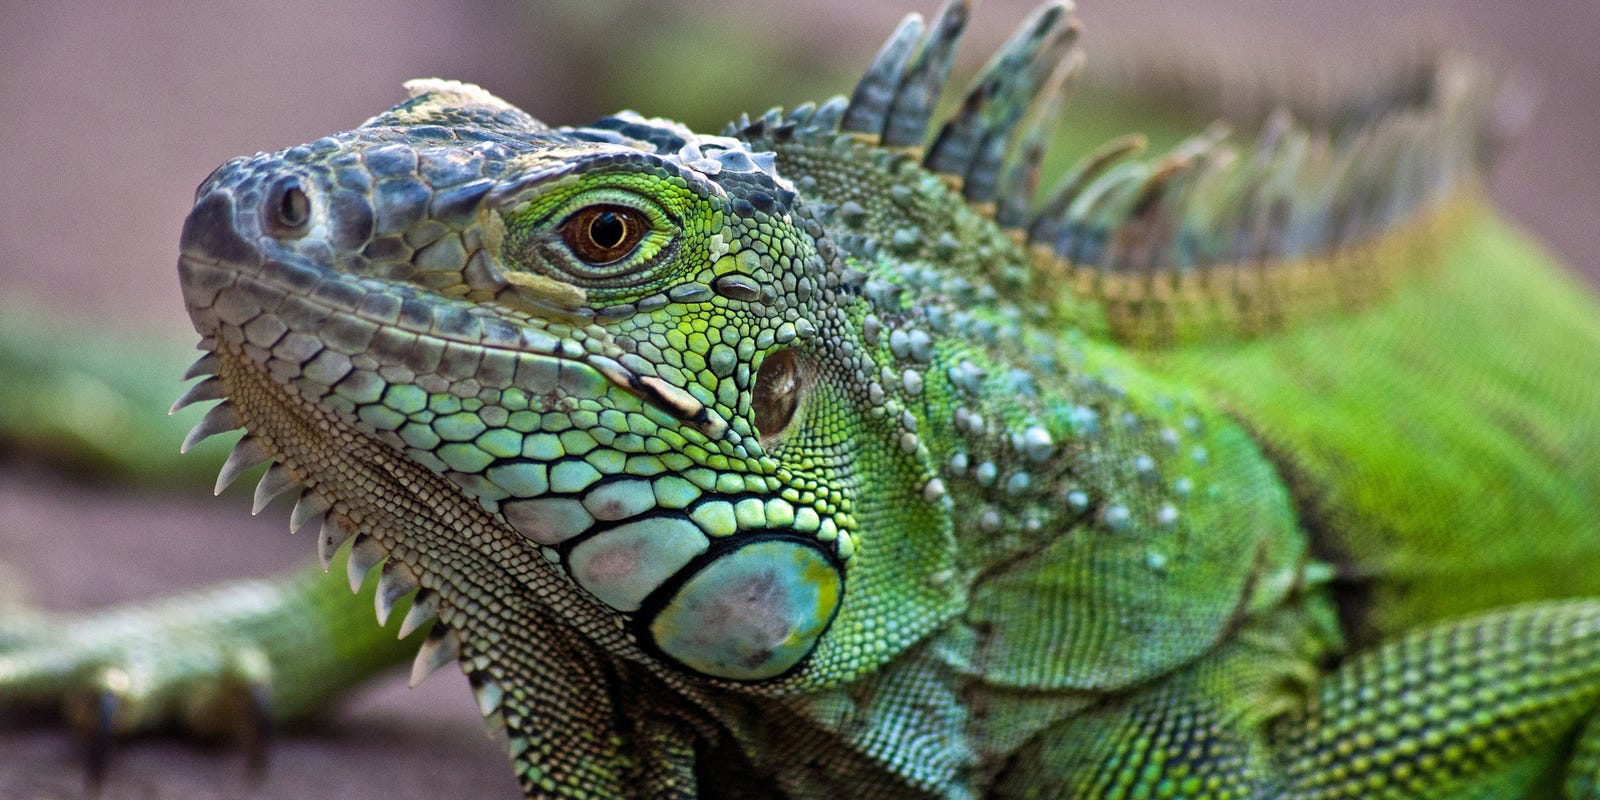 'Falling iguana' alert issued in Florida due to cold weather1600 x 800